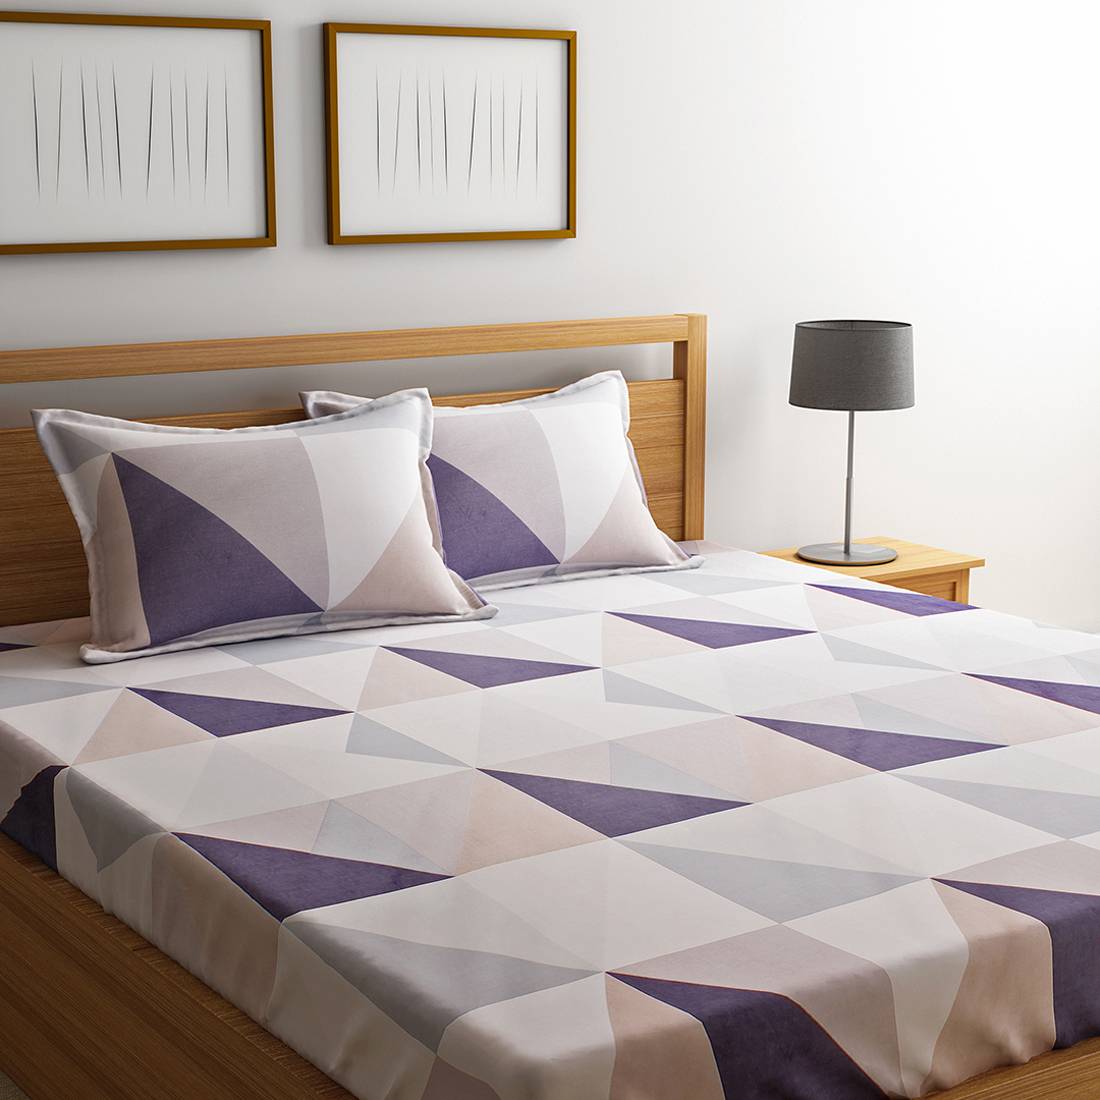 Buy Bedsheets Online and Get up to 50% Off